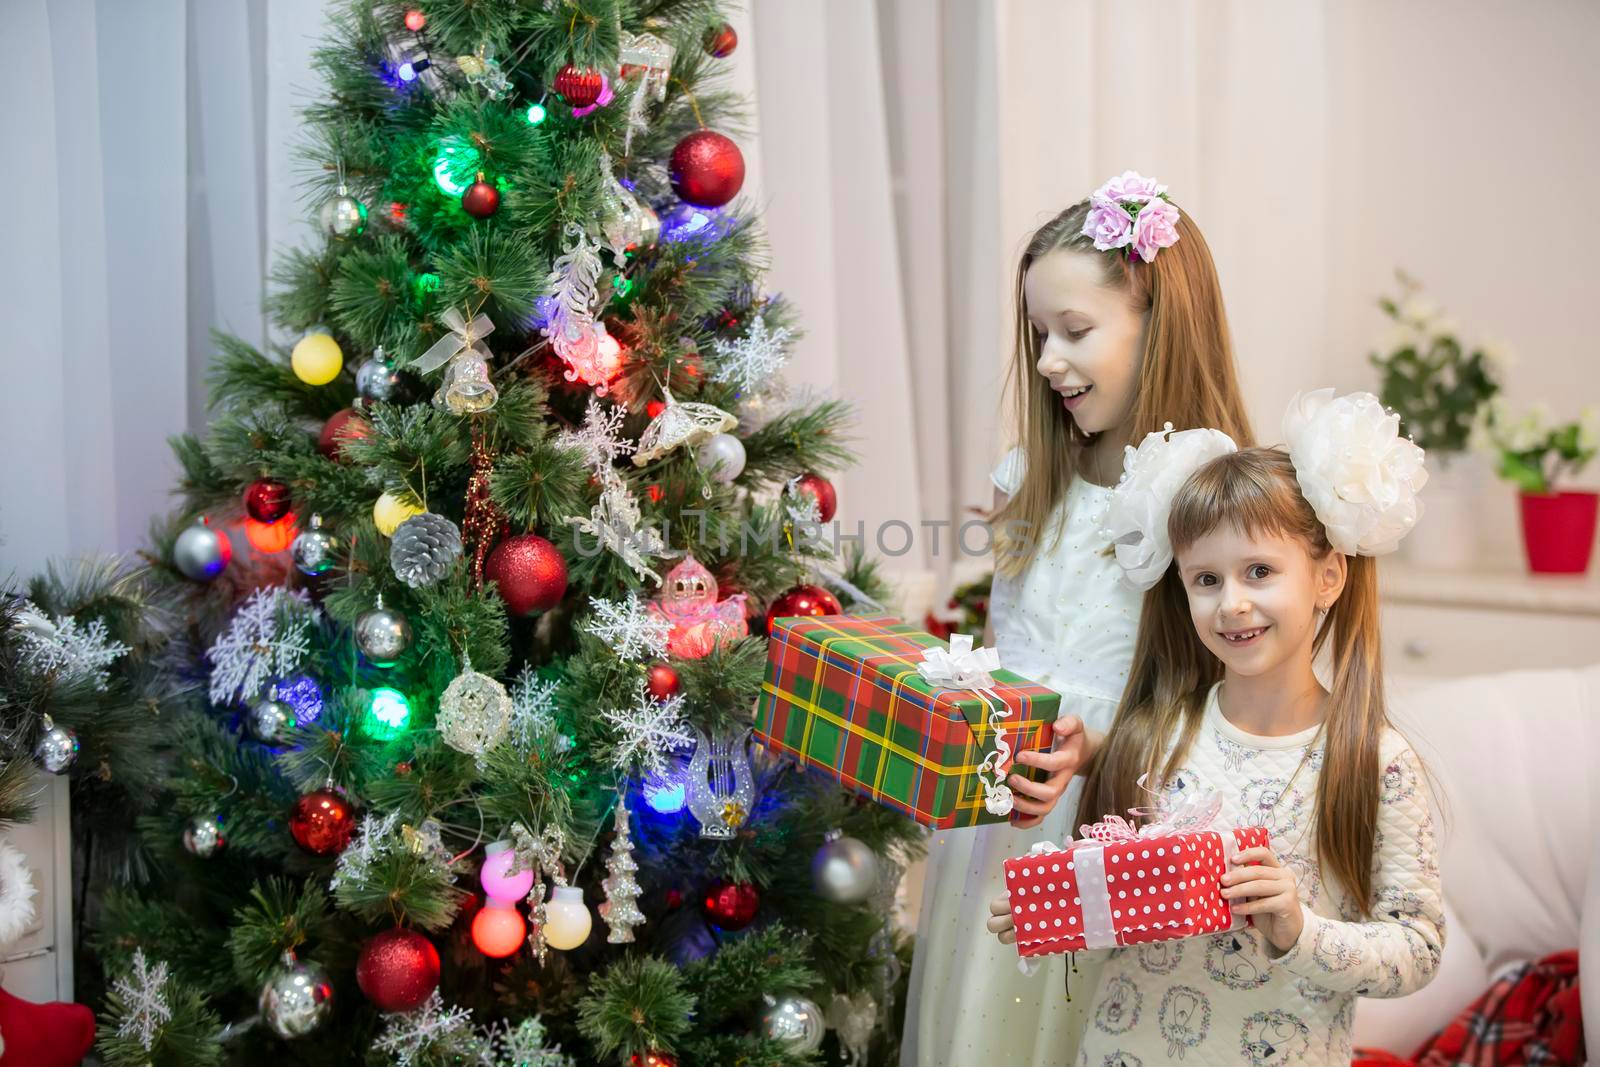 Joyful children at the Christmas tree with gifts on Christmas holidays.